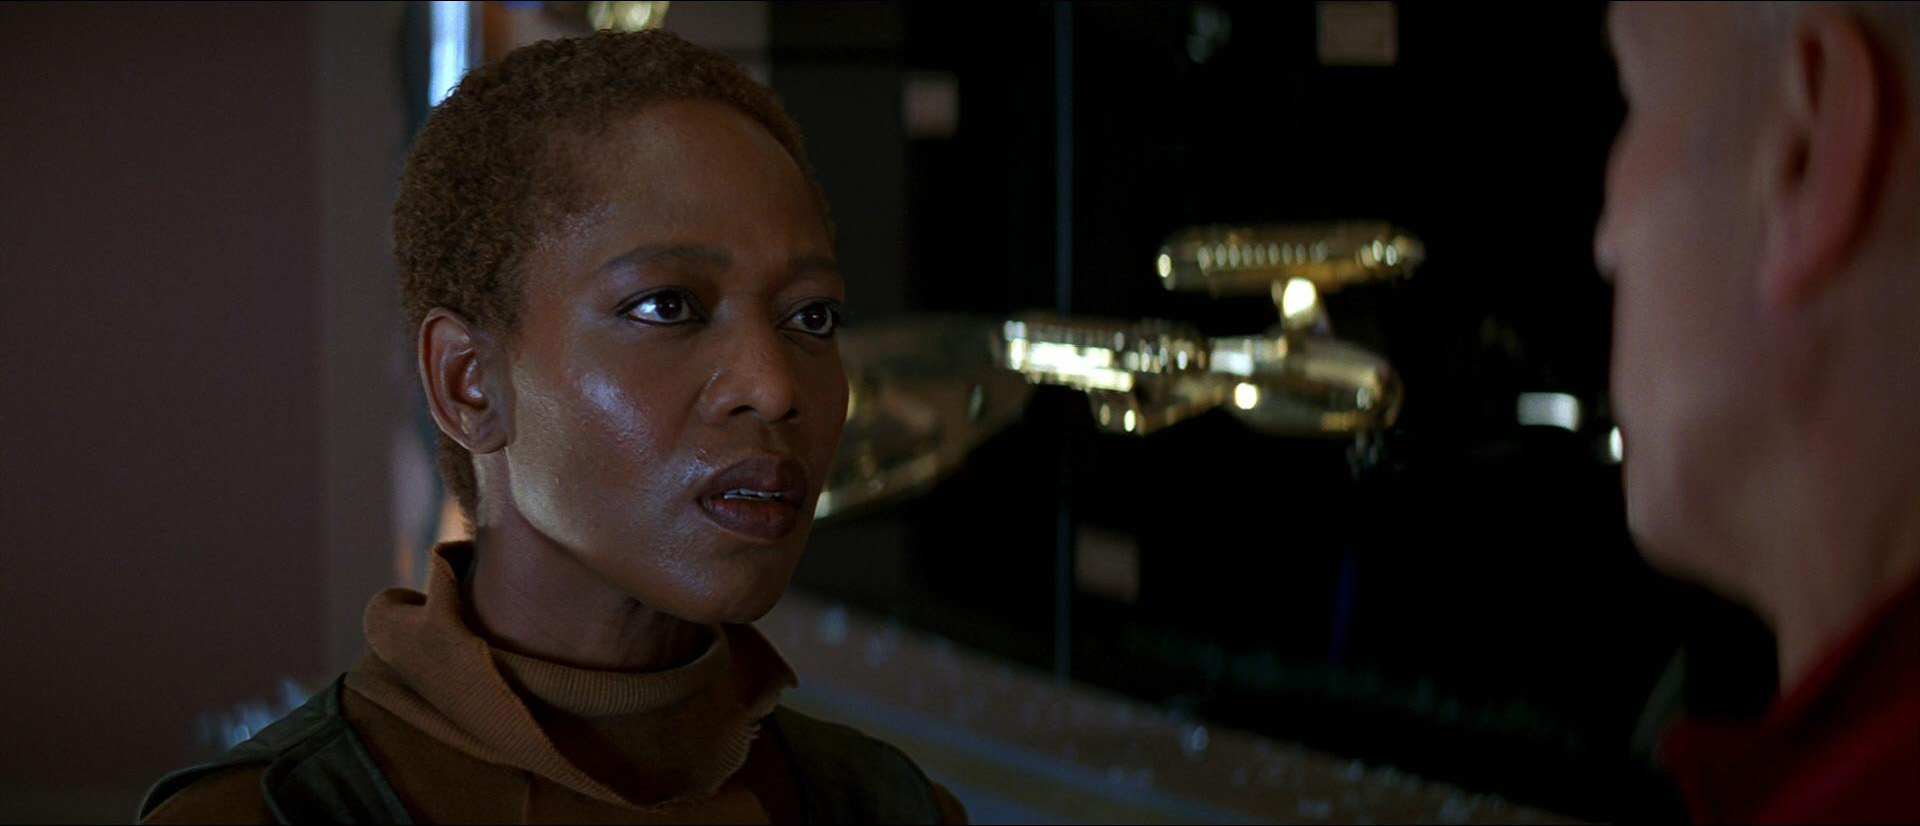 https://movies.trekcore.com/gallery/albums/movie-08/screencaps/first-contact-2009/chapter-24/firstcontacthd1689.jpg